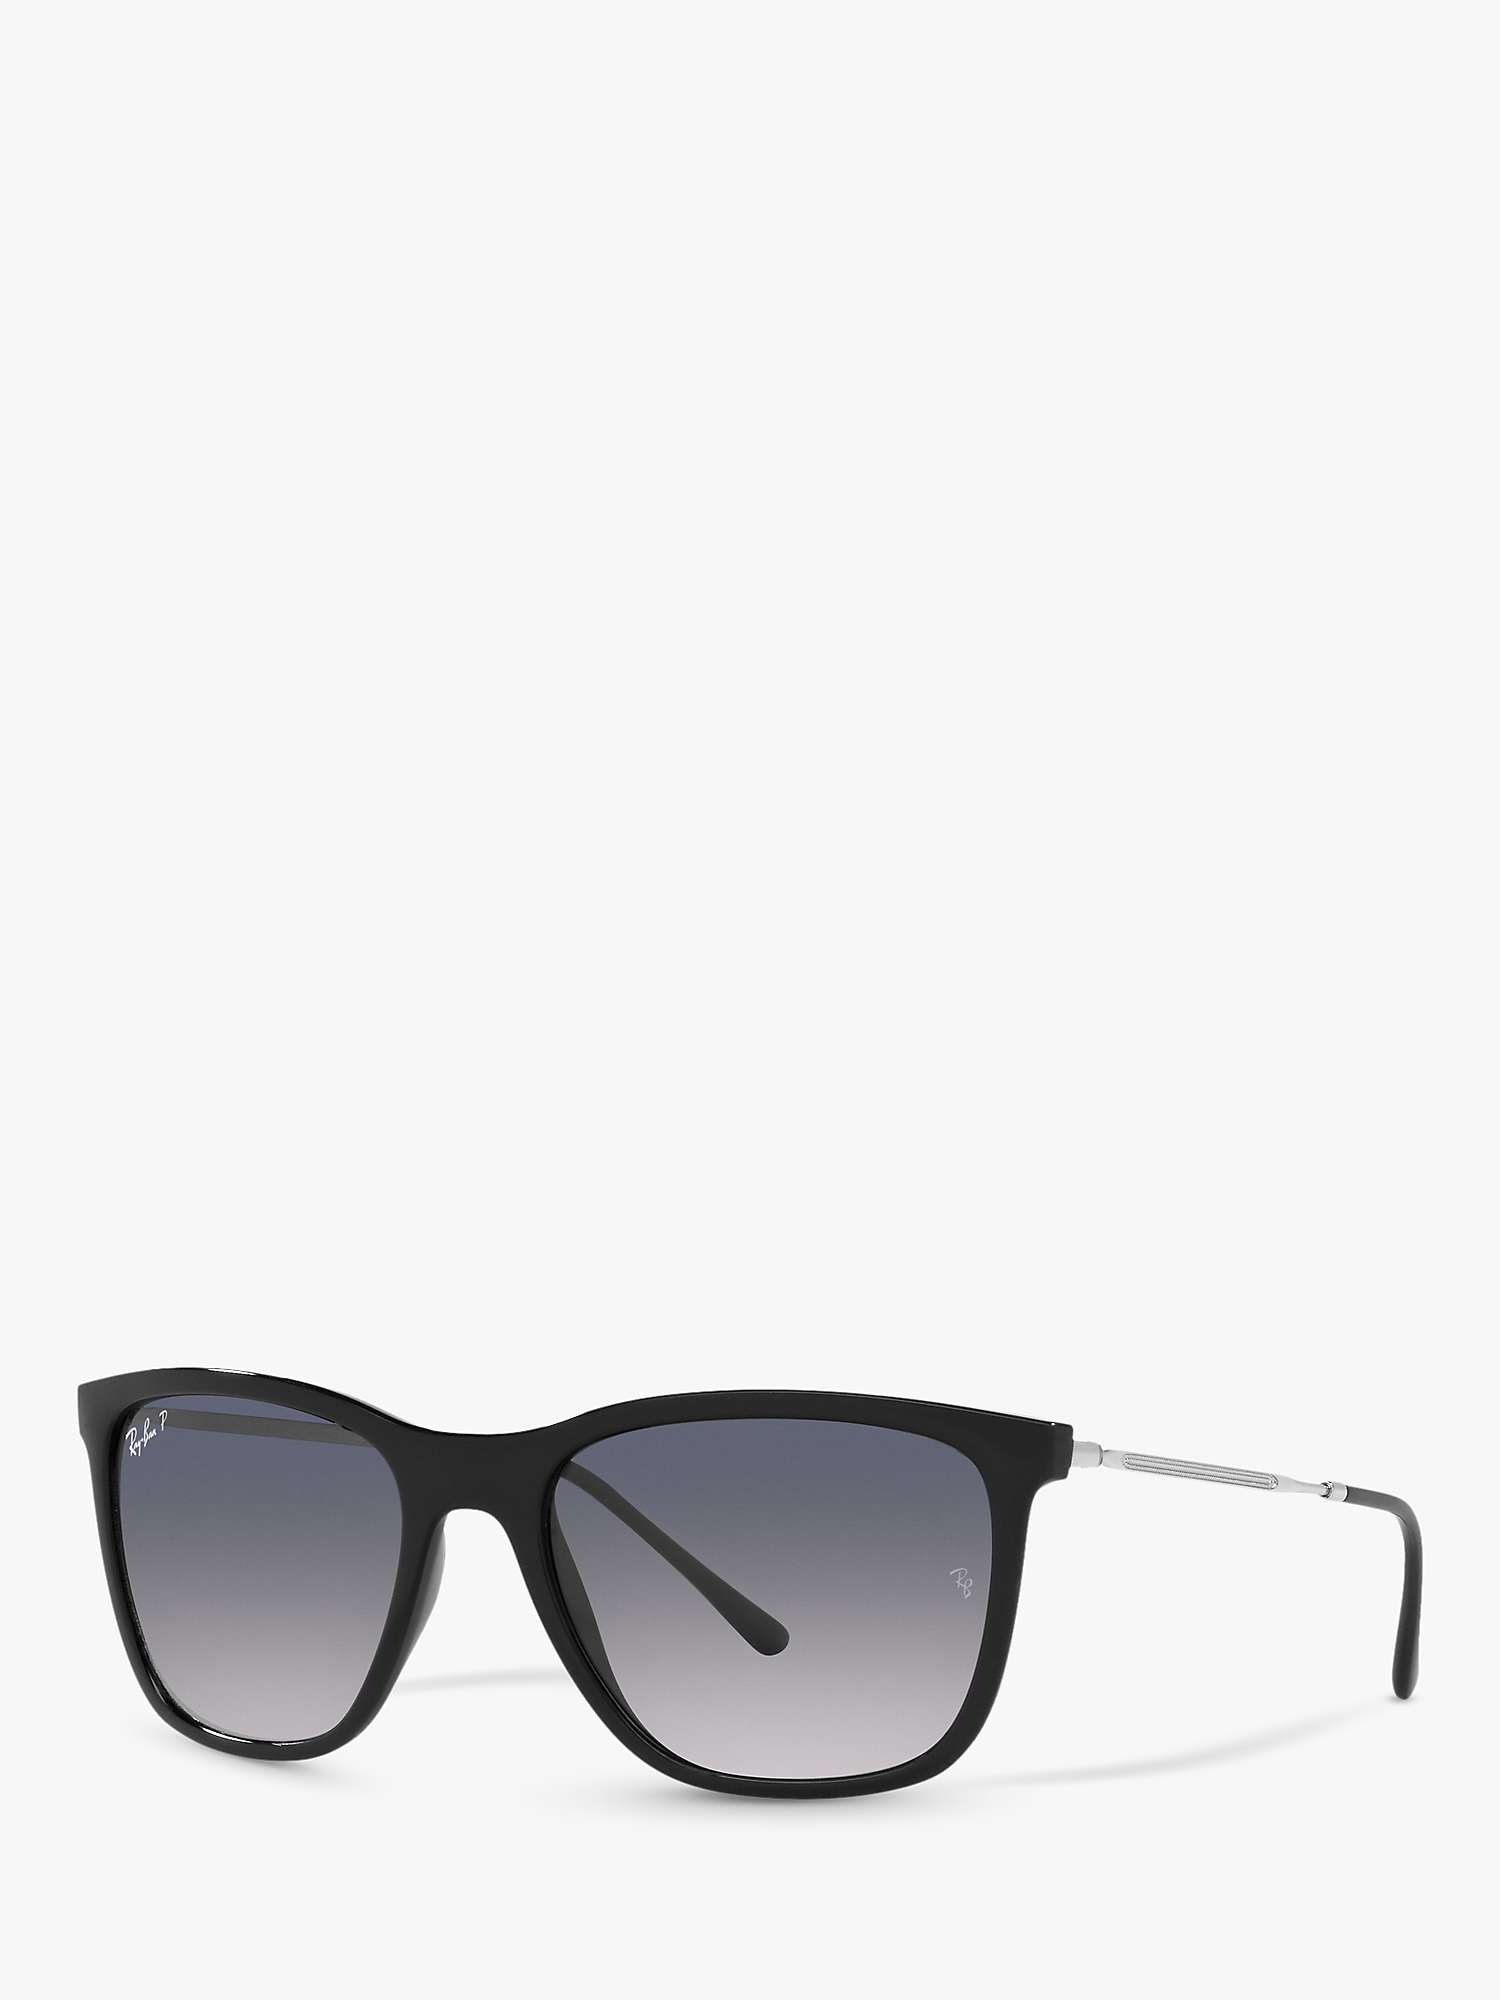 Ray-Ban RB4344 Unisex Polarised Pillow Square Frame Sunglasses,  Black/Silver/Grey Gradient at John Lewis & Partners